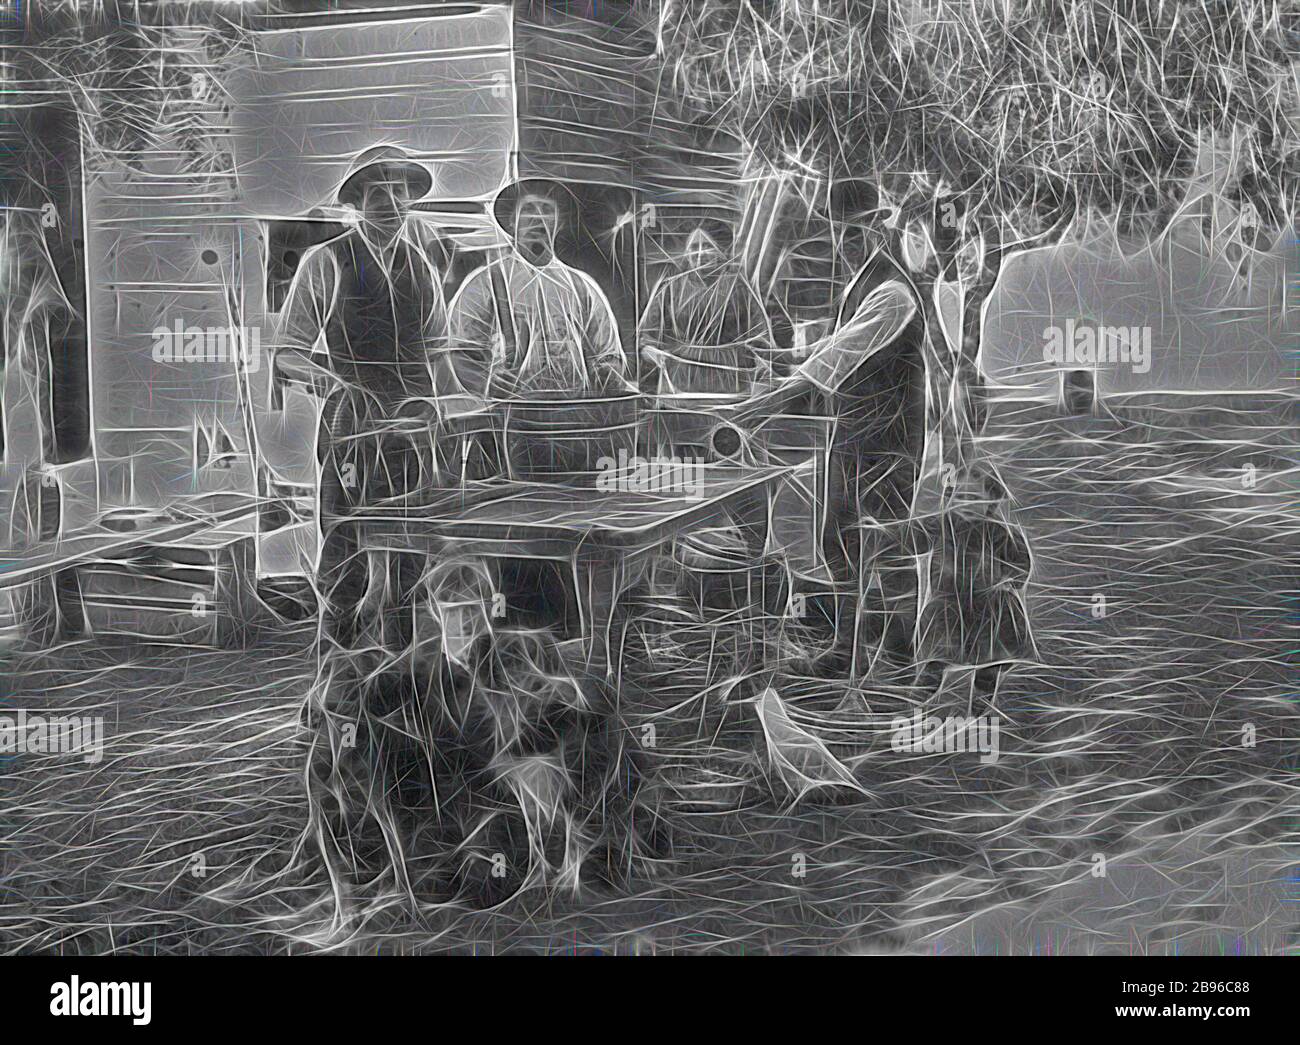 Negative Hoffman Family Making German Sausage Glenore District Victoria Circa 1900 The Hoffman Family Making German Sausage At A Table In Their Backyard The Group Consists Of Mr And Mrs Hoffman